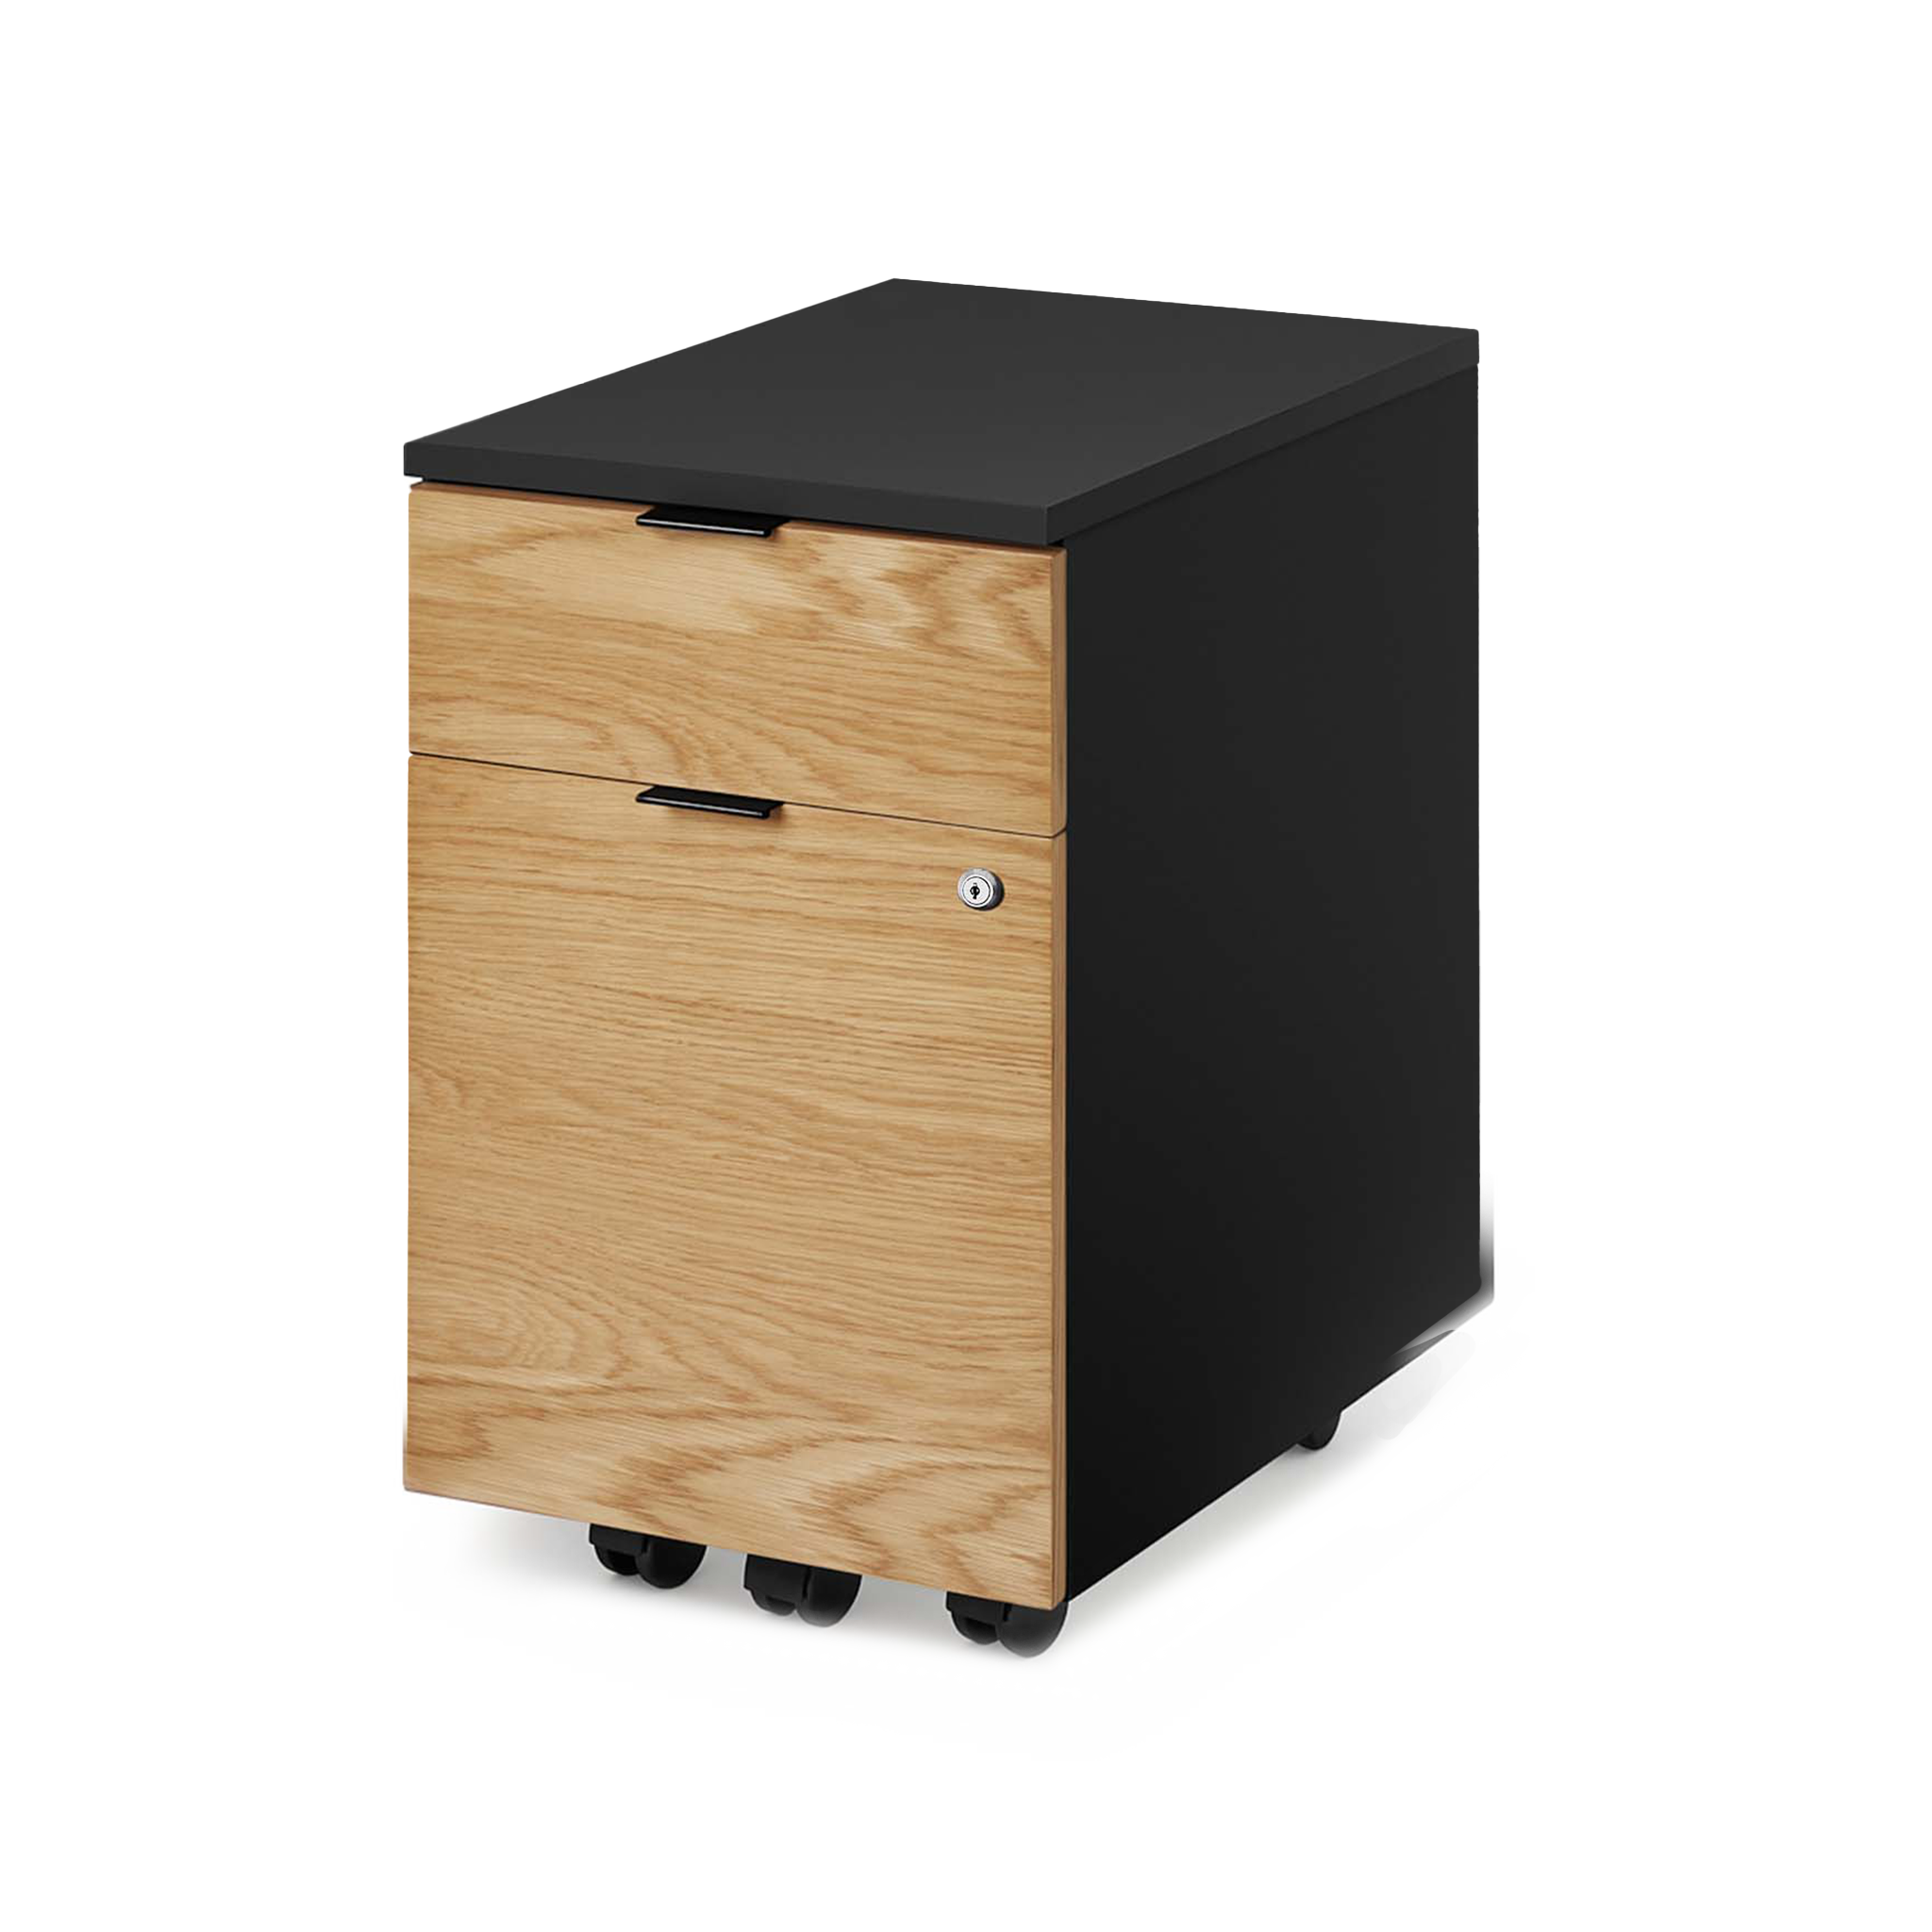 Neat Filing Cabinet - Cabinet-Color-Black/Front-Panels-White Oak - Cabinet-Color-Noir/Front-Panels-Chêne Blanc